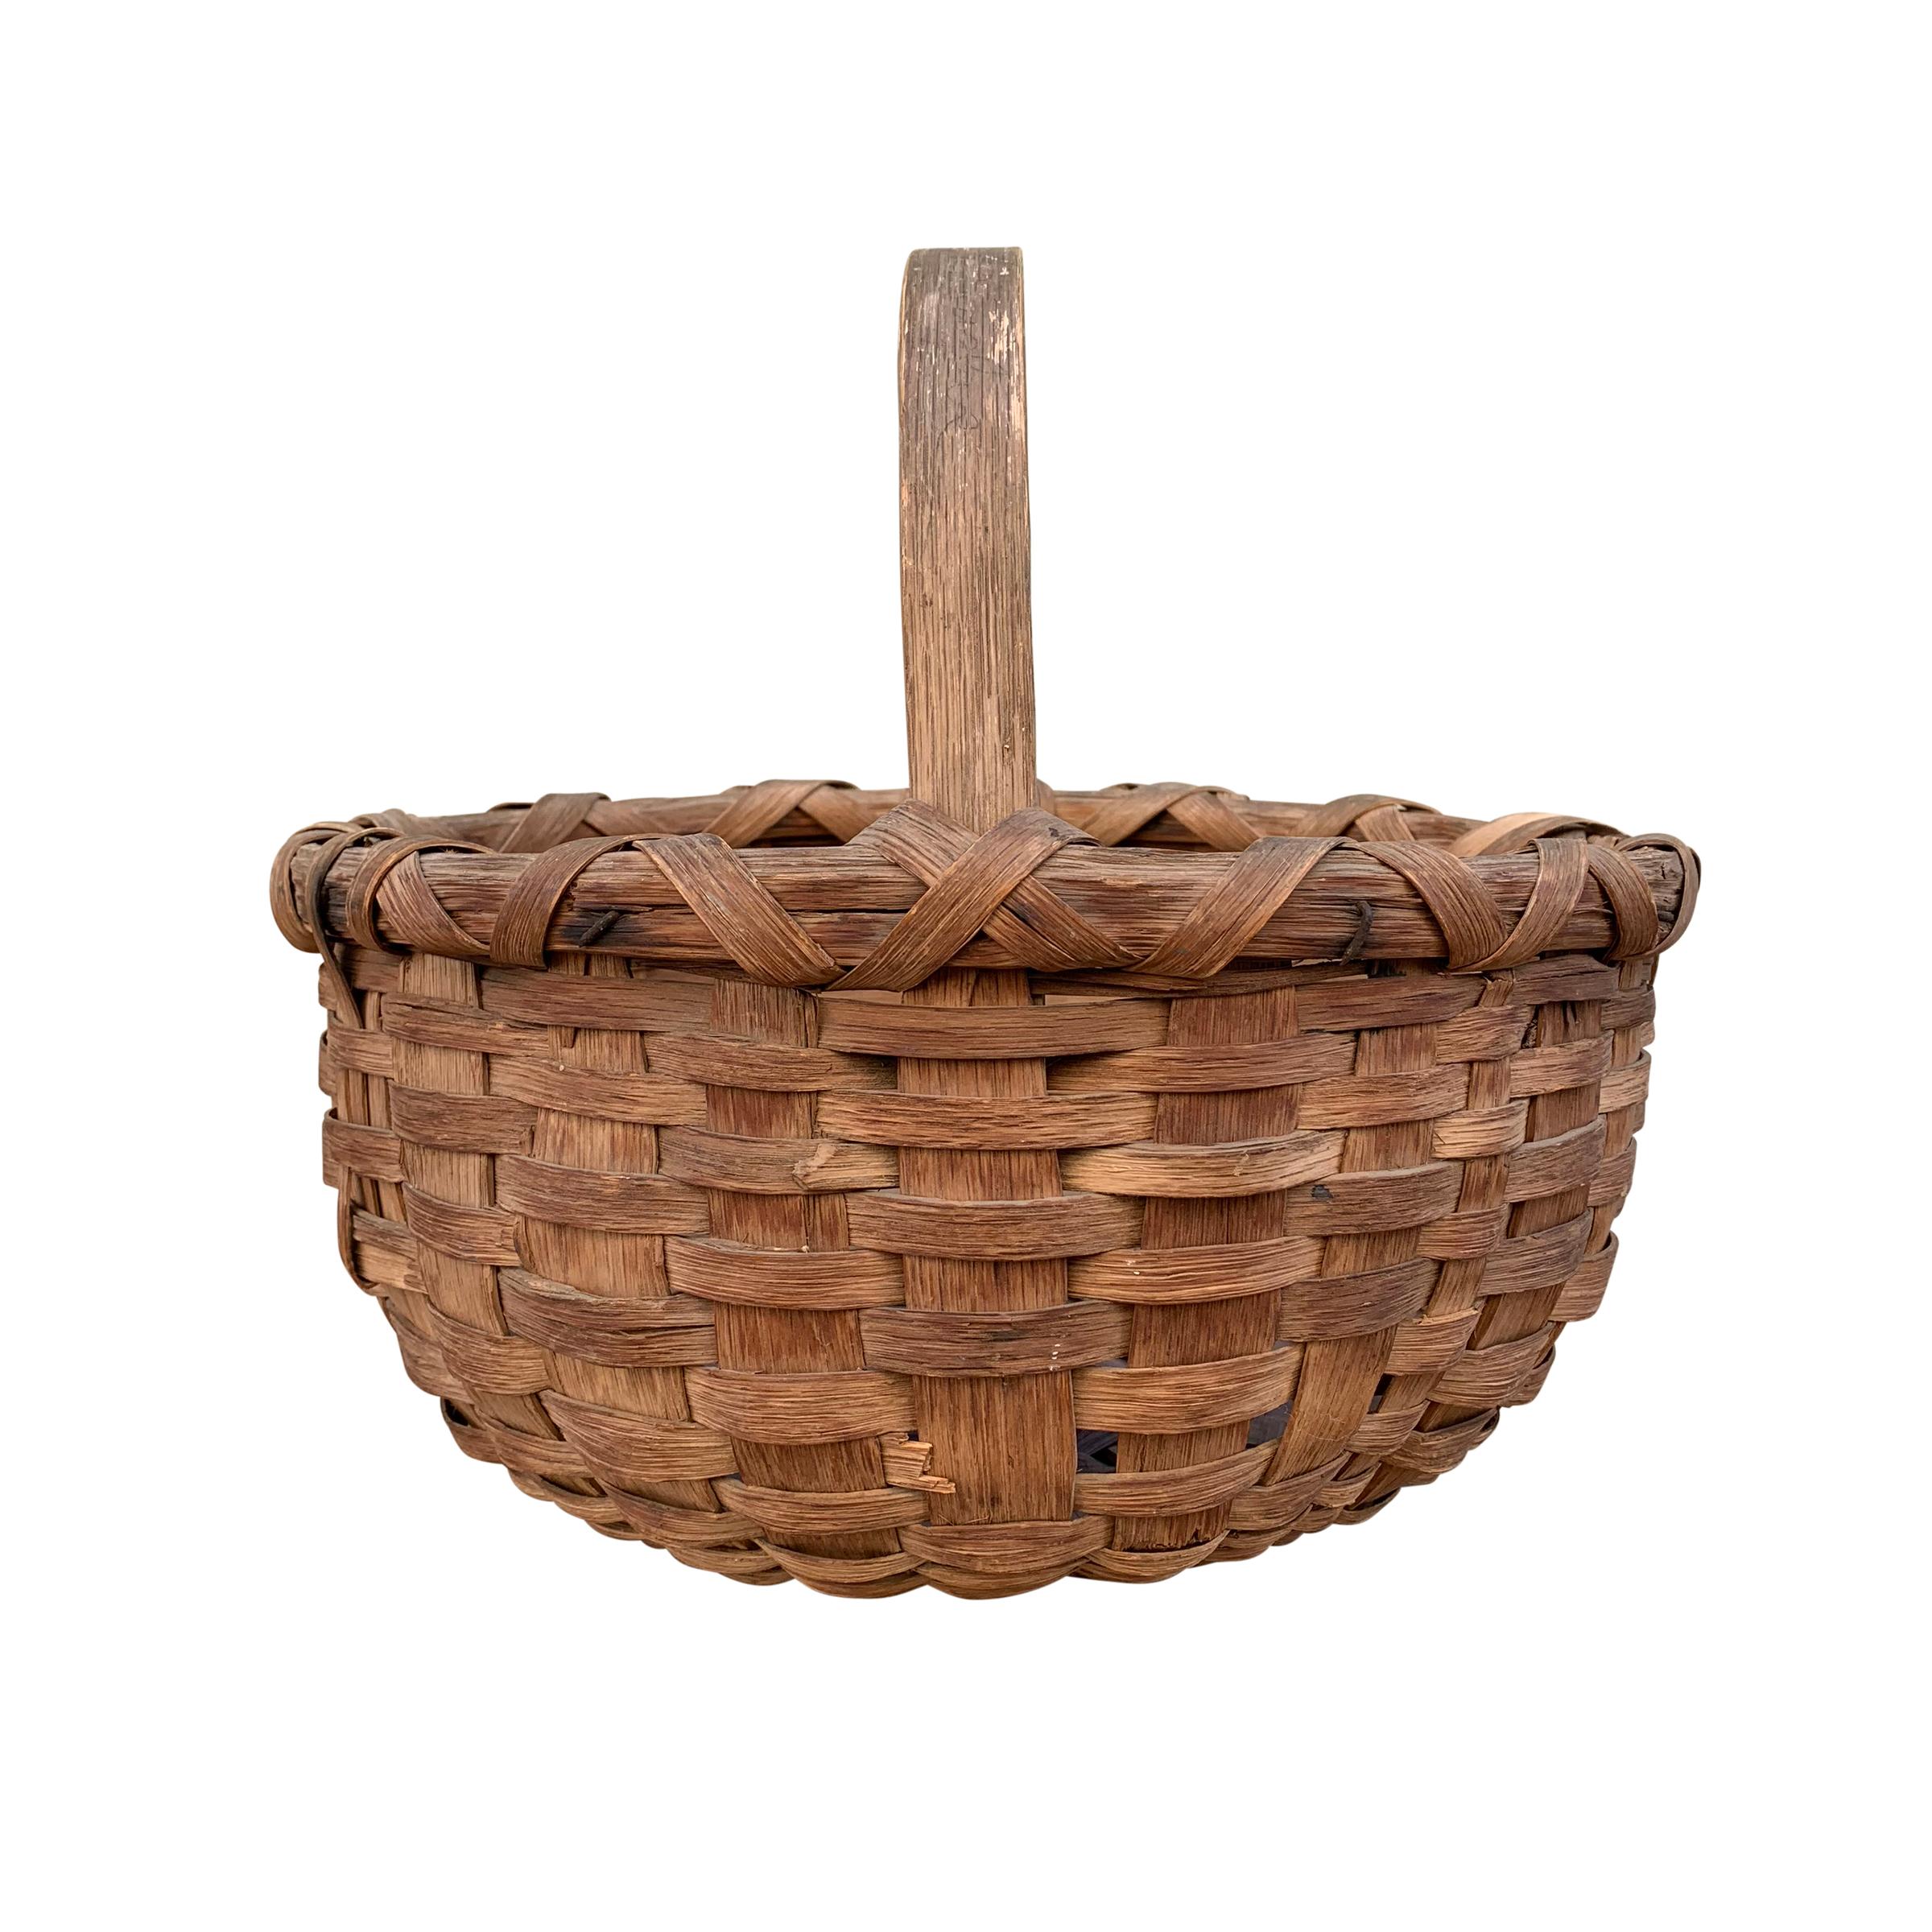 A beautiful 19th century American oak splint gathering basket with a bentwood handle and a double-banded rim. Gathering baskets like this were used to gather fruits, vegetables, flowers, and eggs from the farm.